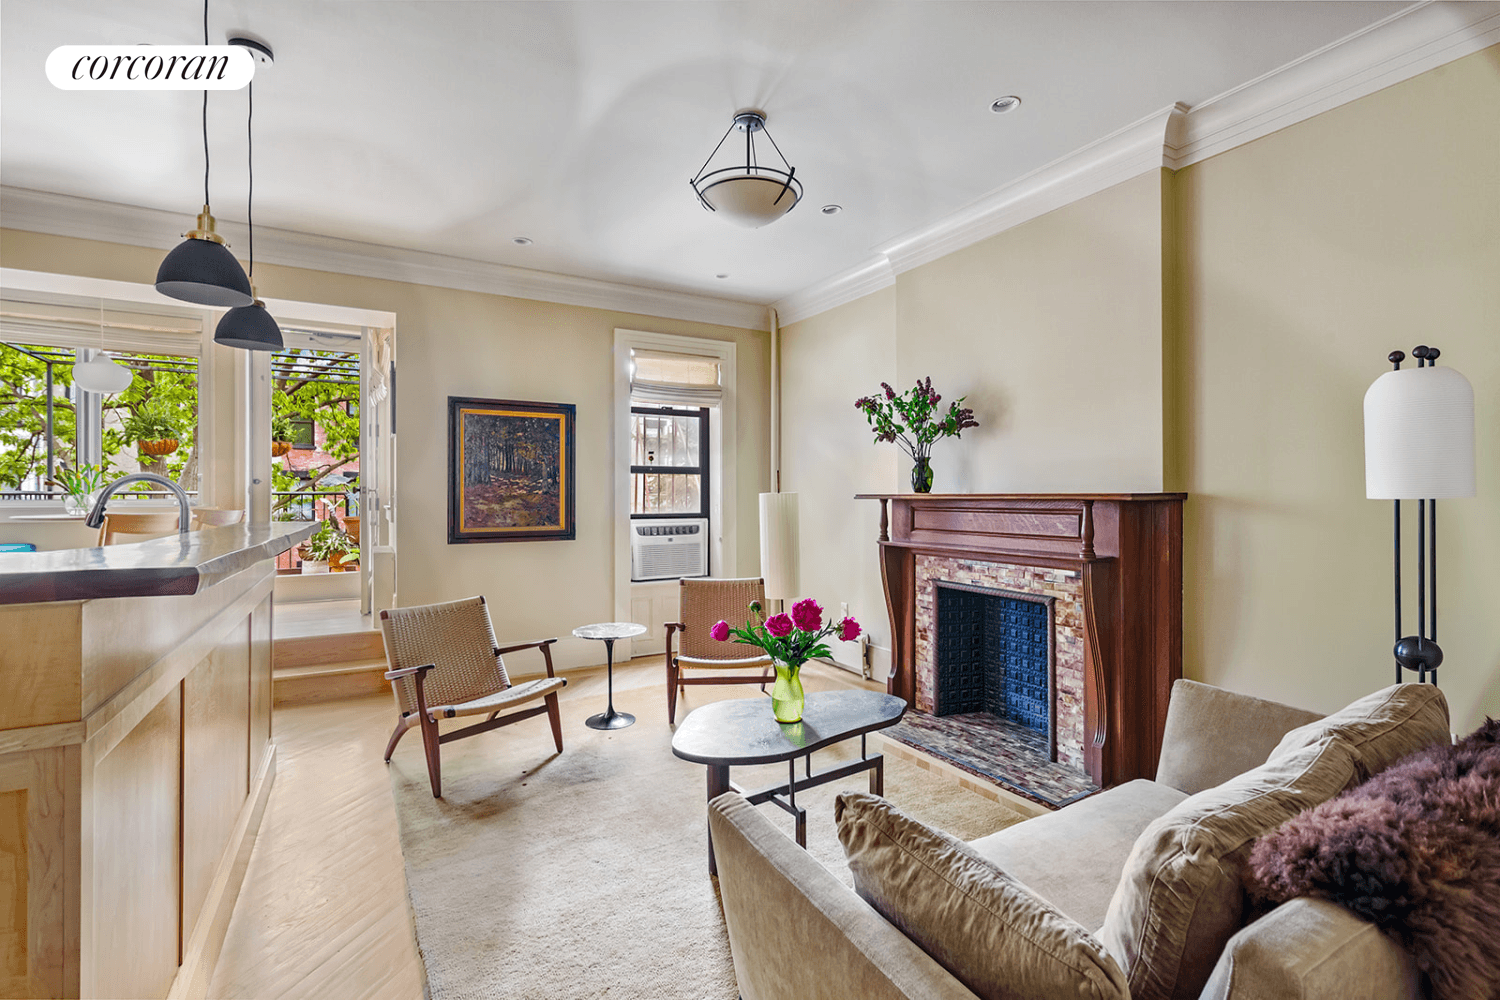 Welcome to 292 Garfield Place 3, a charming one bedroom co op with a lovely terrace in the heart of Park Slope.